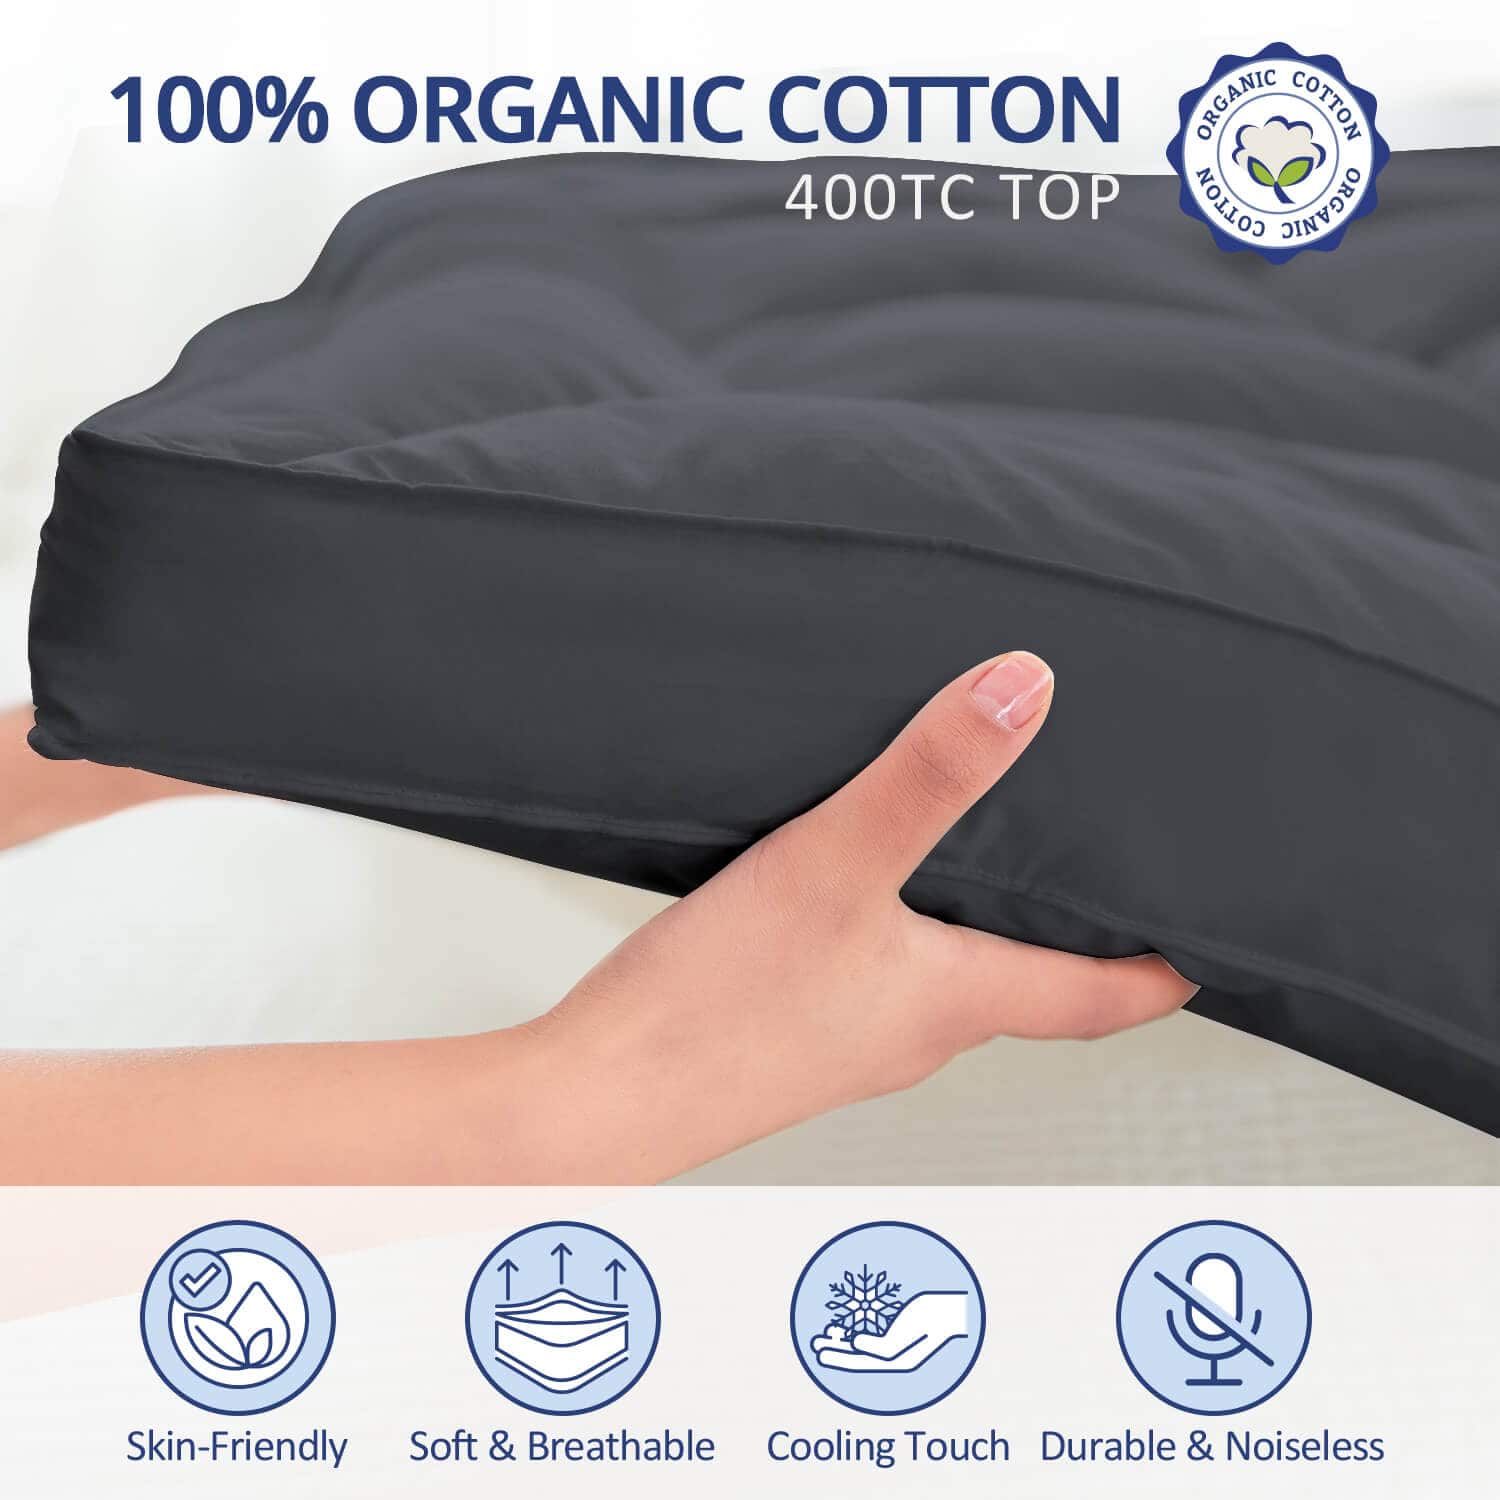 Extra Thick Cooling Mattress Topper 